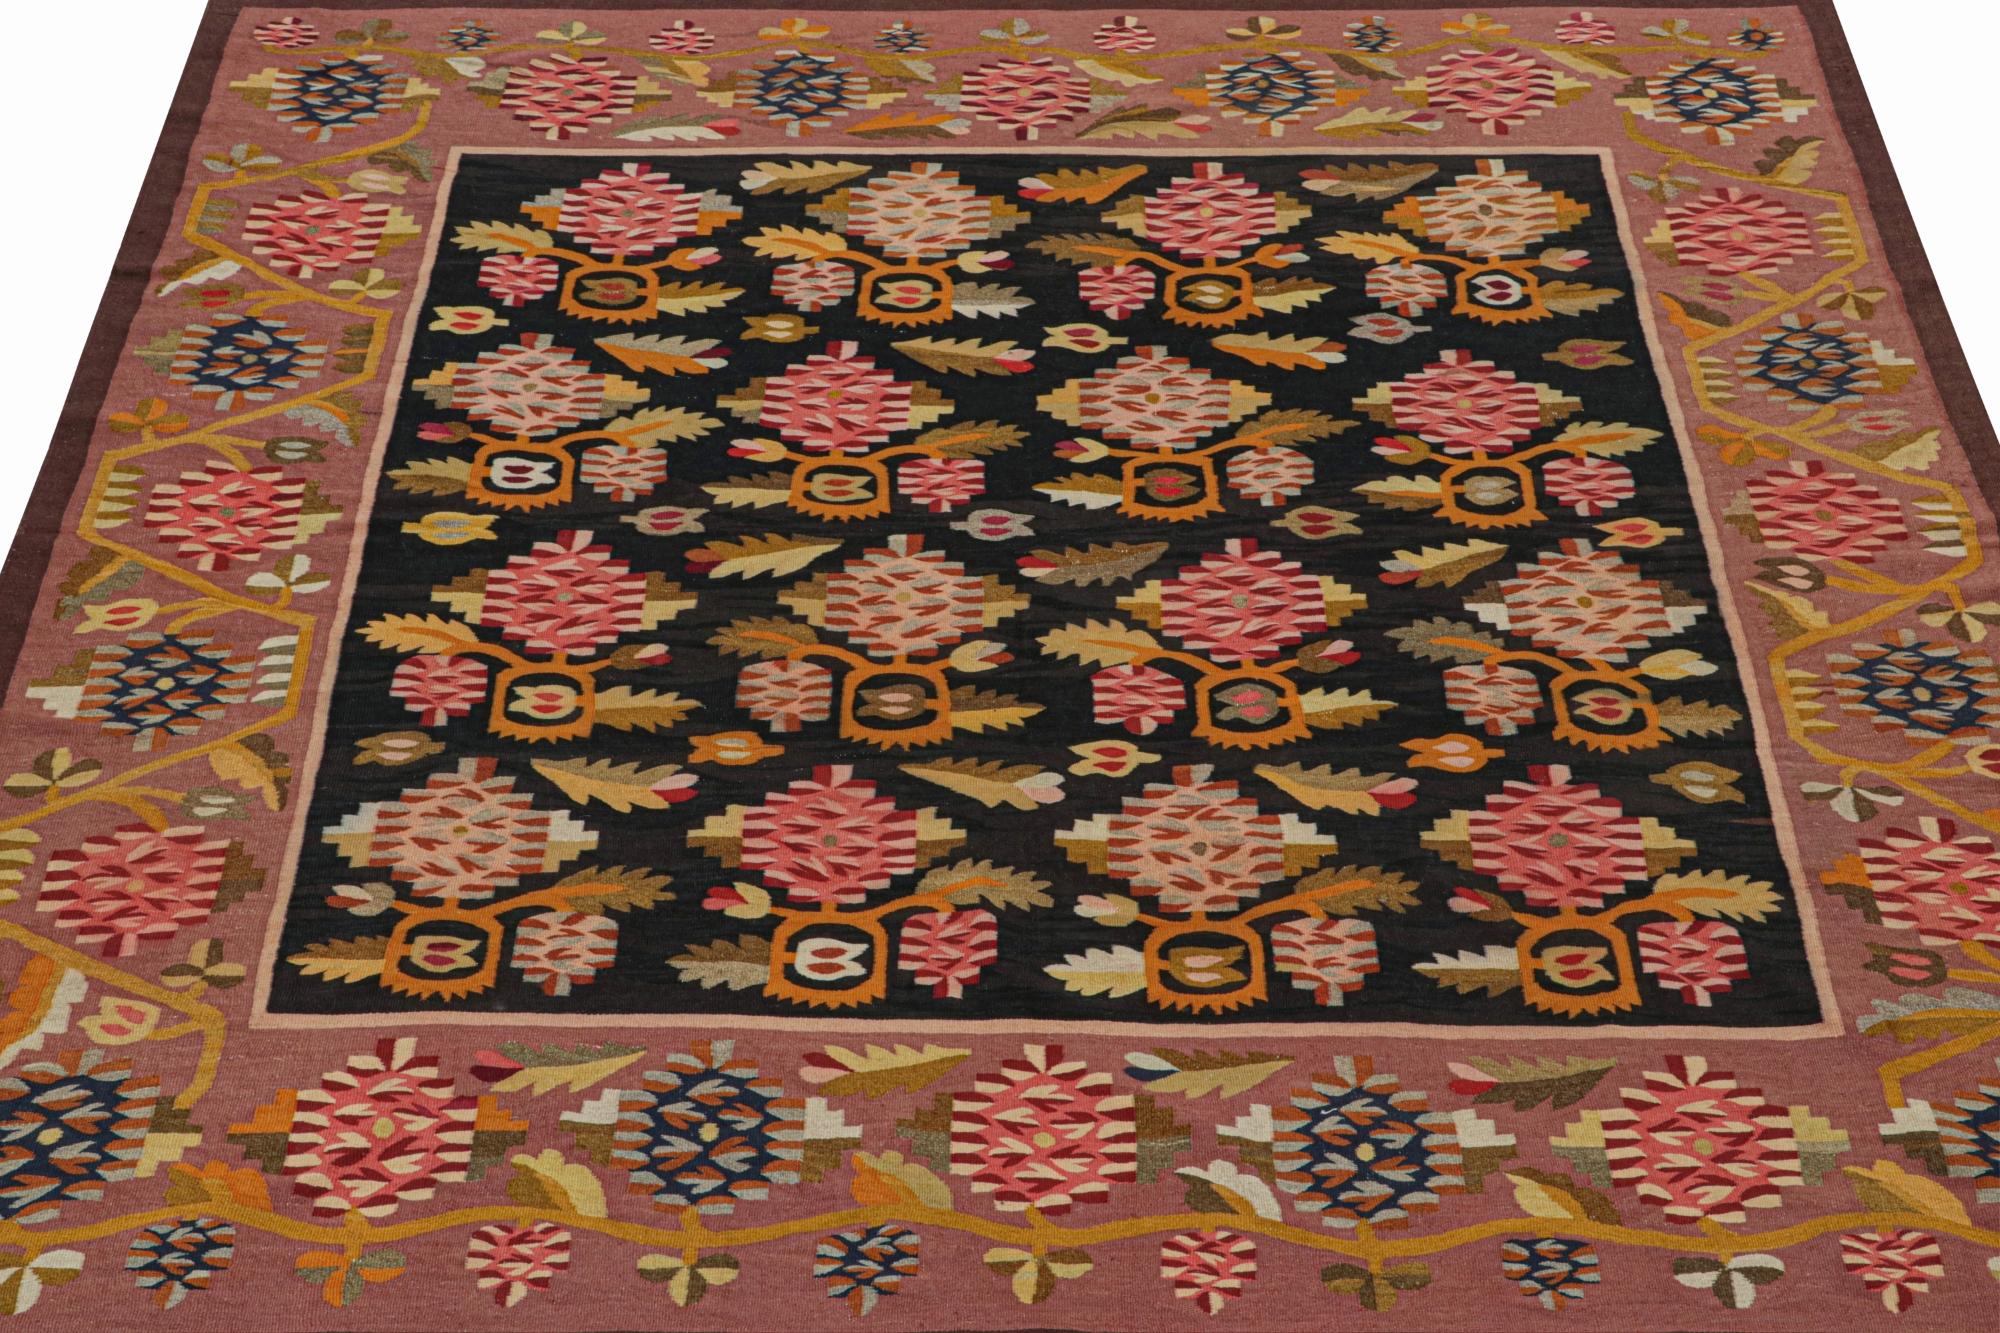 Handwoven in wool, this antique 7x7 square Kilim is a rare Bessarabian flat weave, originating circa 1920-1930.

On the Design:

Connoisseurs may note how rare it is to find a square Bessarabian Kilim among those curated today. This particular